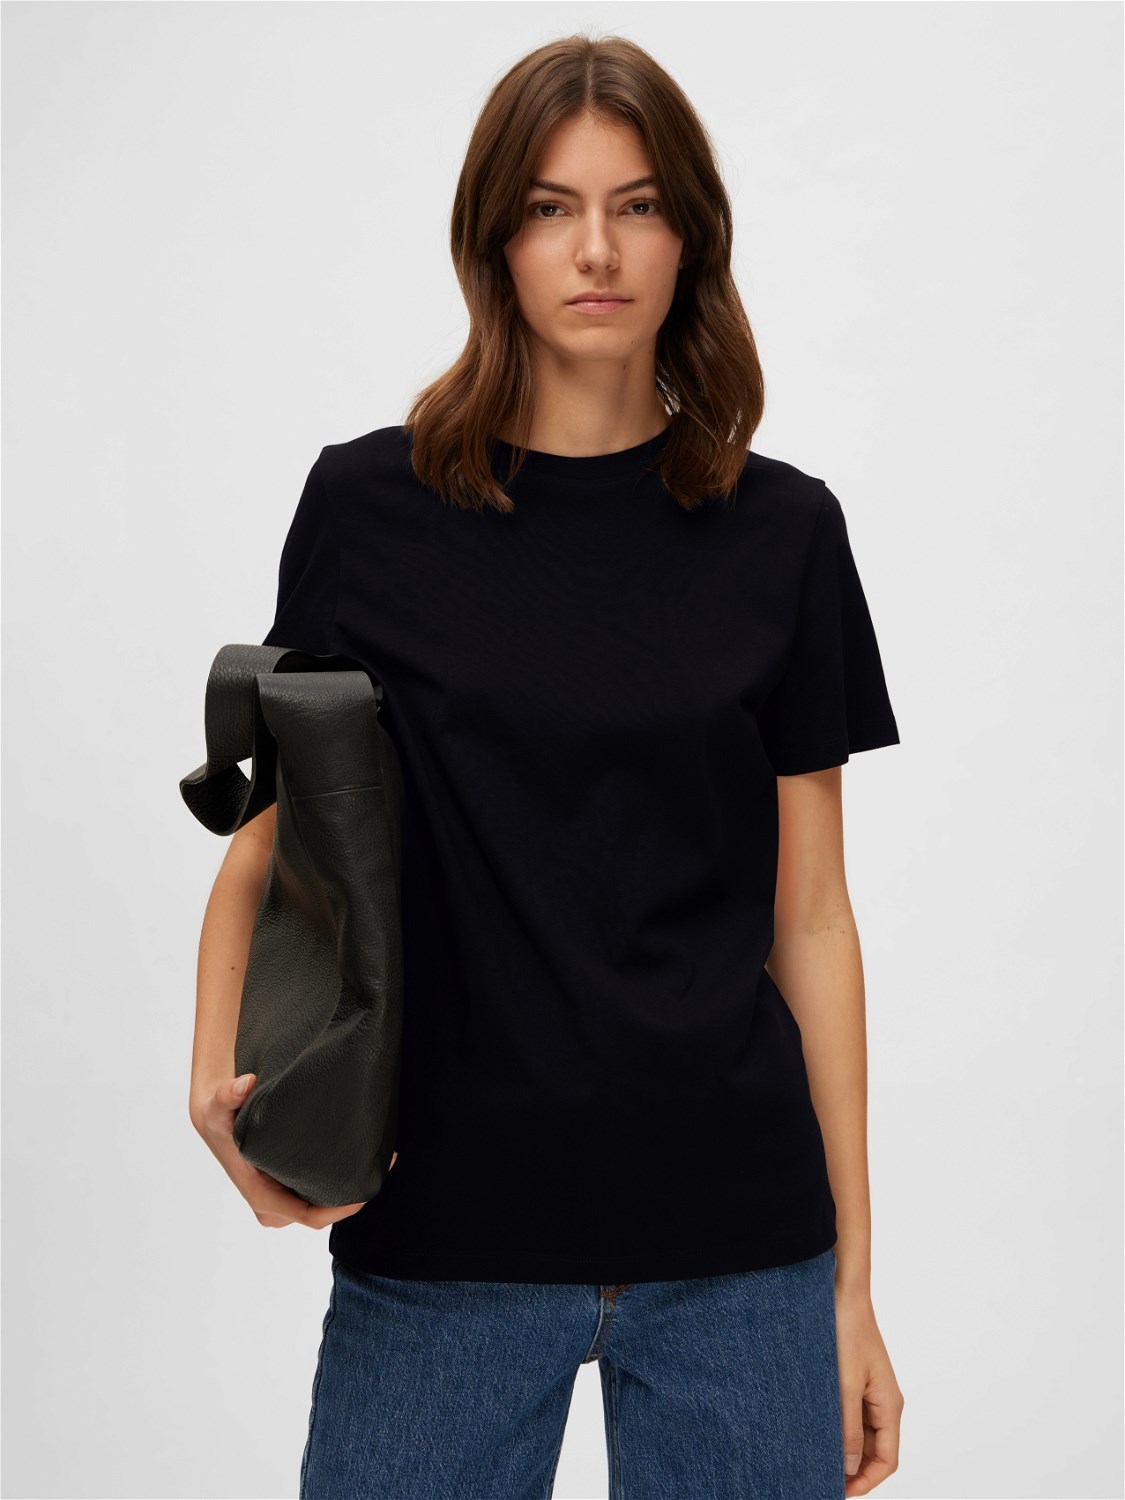 SLFMYESSENTIAL ss o-neck tee Black